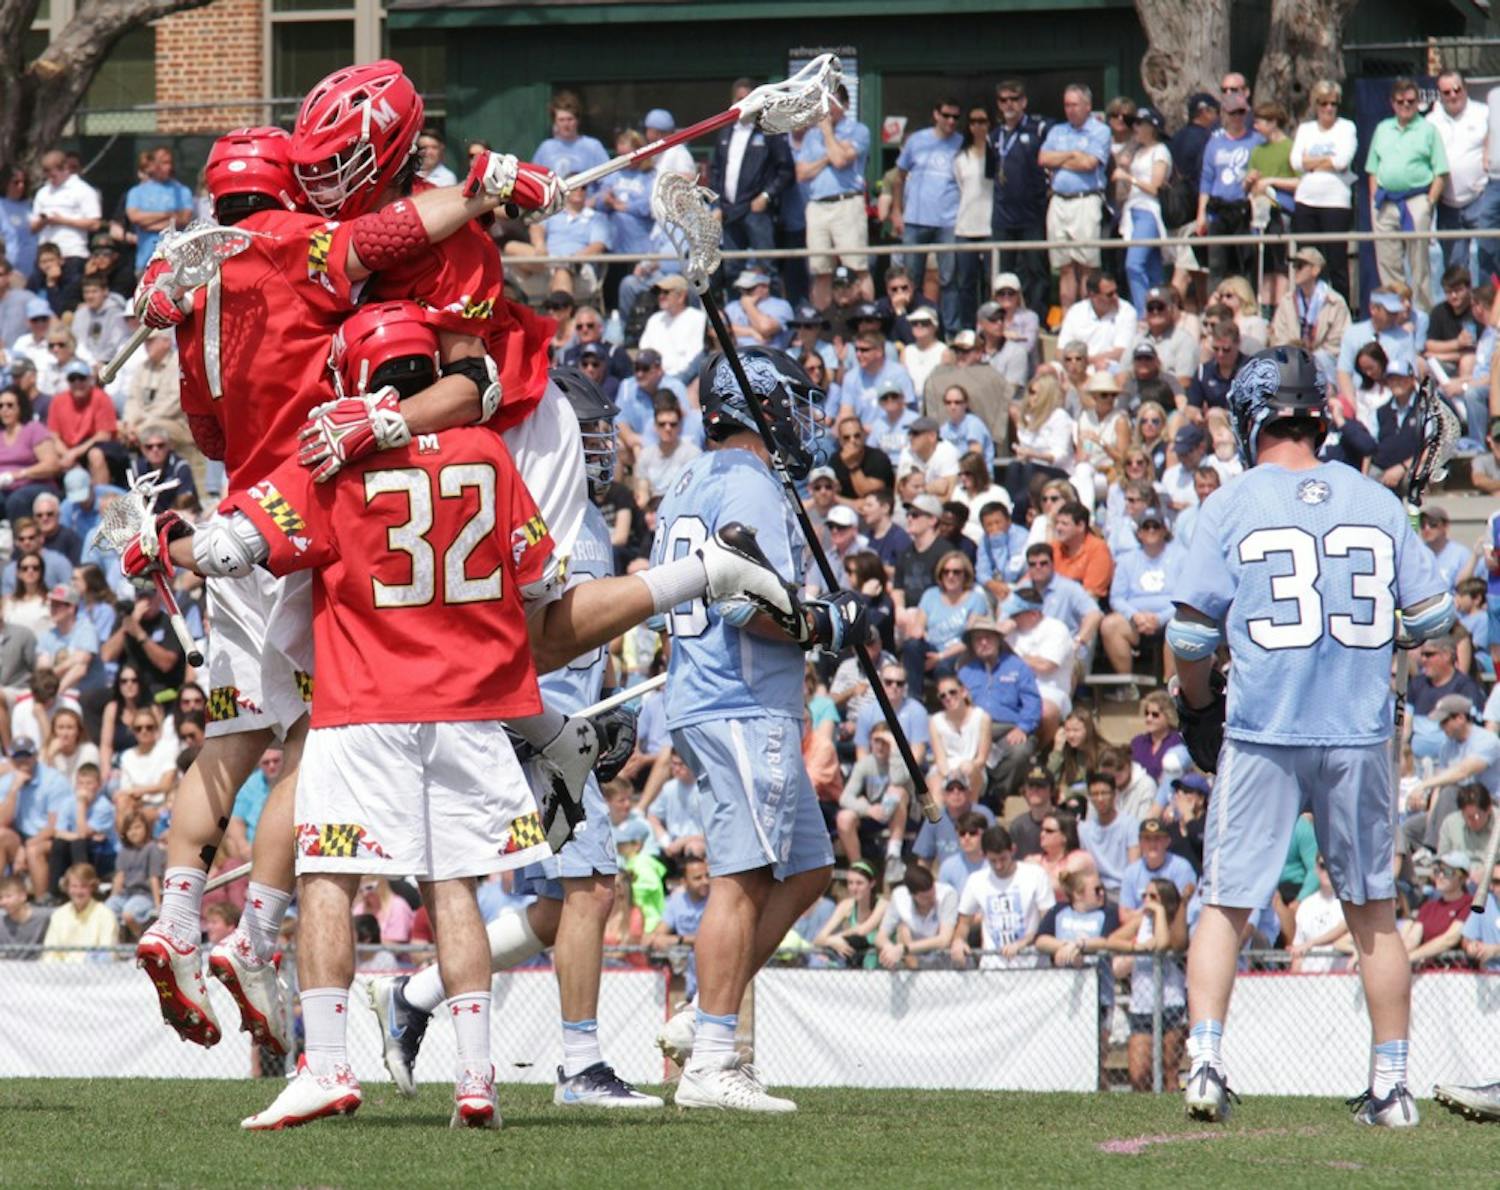 Maryland lacrosse players celebrate a goal during the first half of their 15-7&nbsp;defeat of&nbsp;UNC. North Carolina claimed the NCAA title the last time the two teams played each other in May.&nbsp;